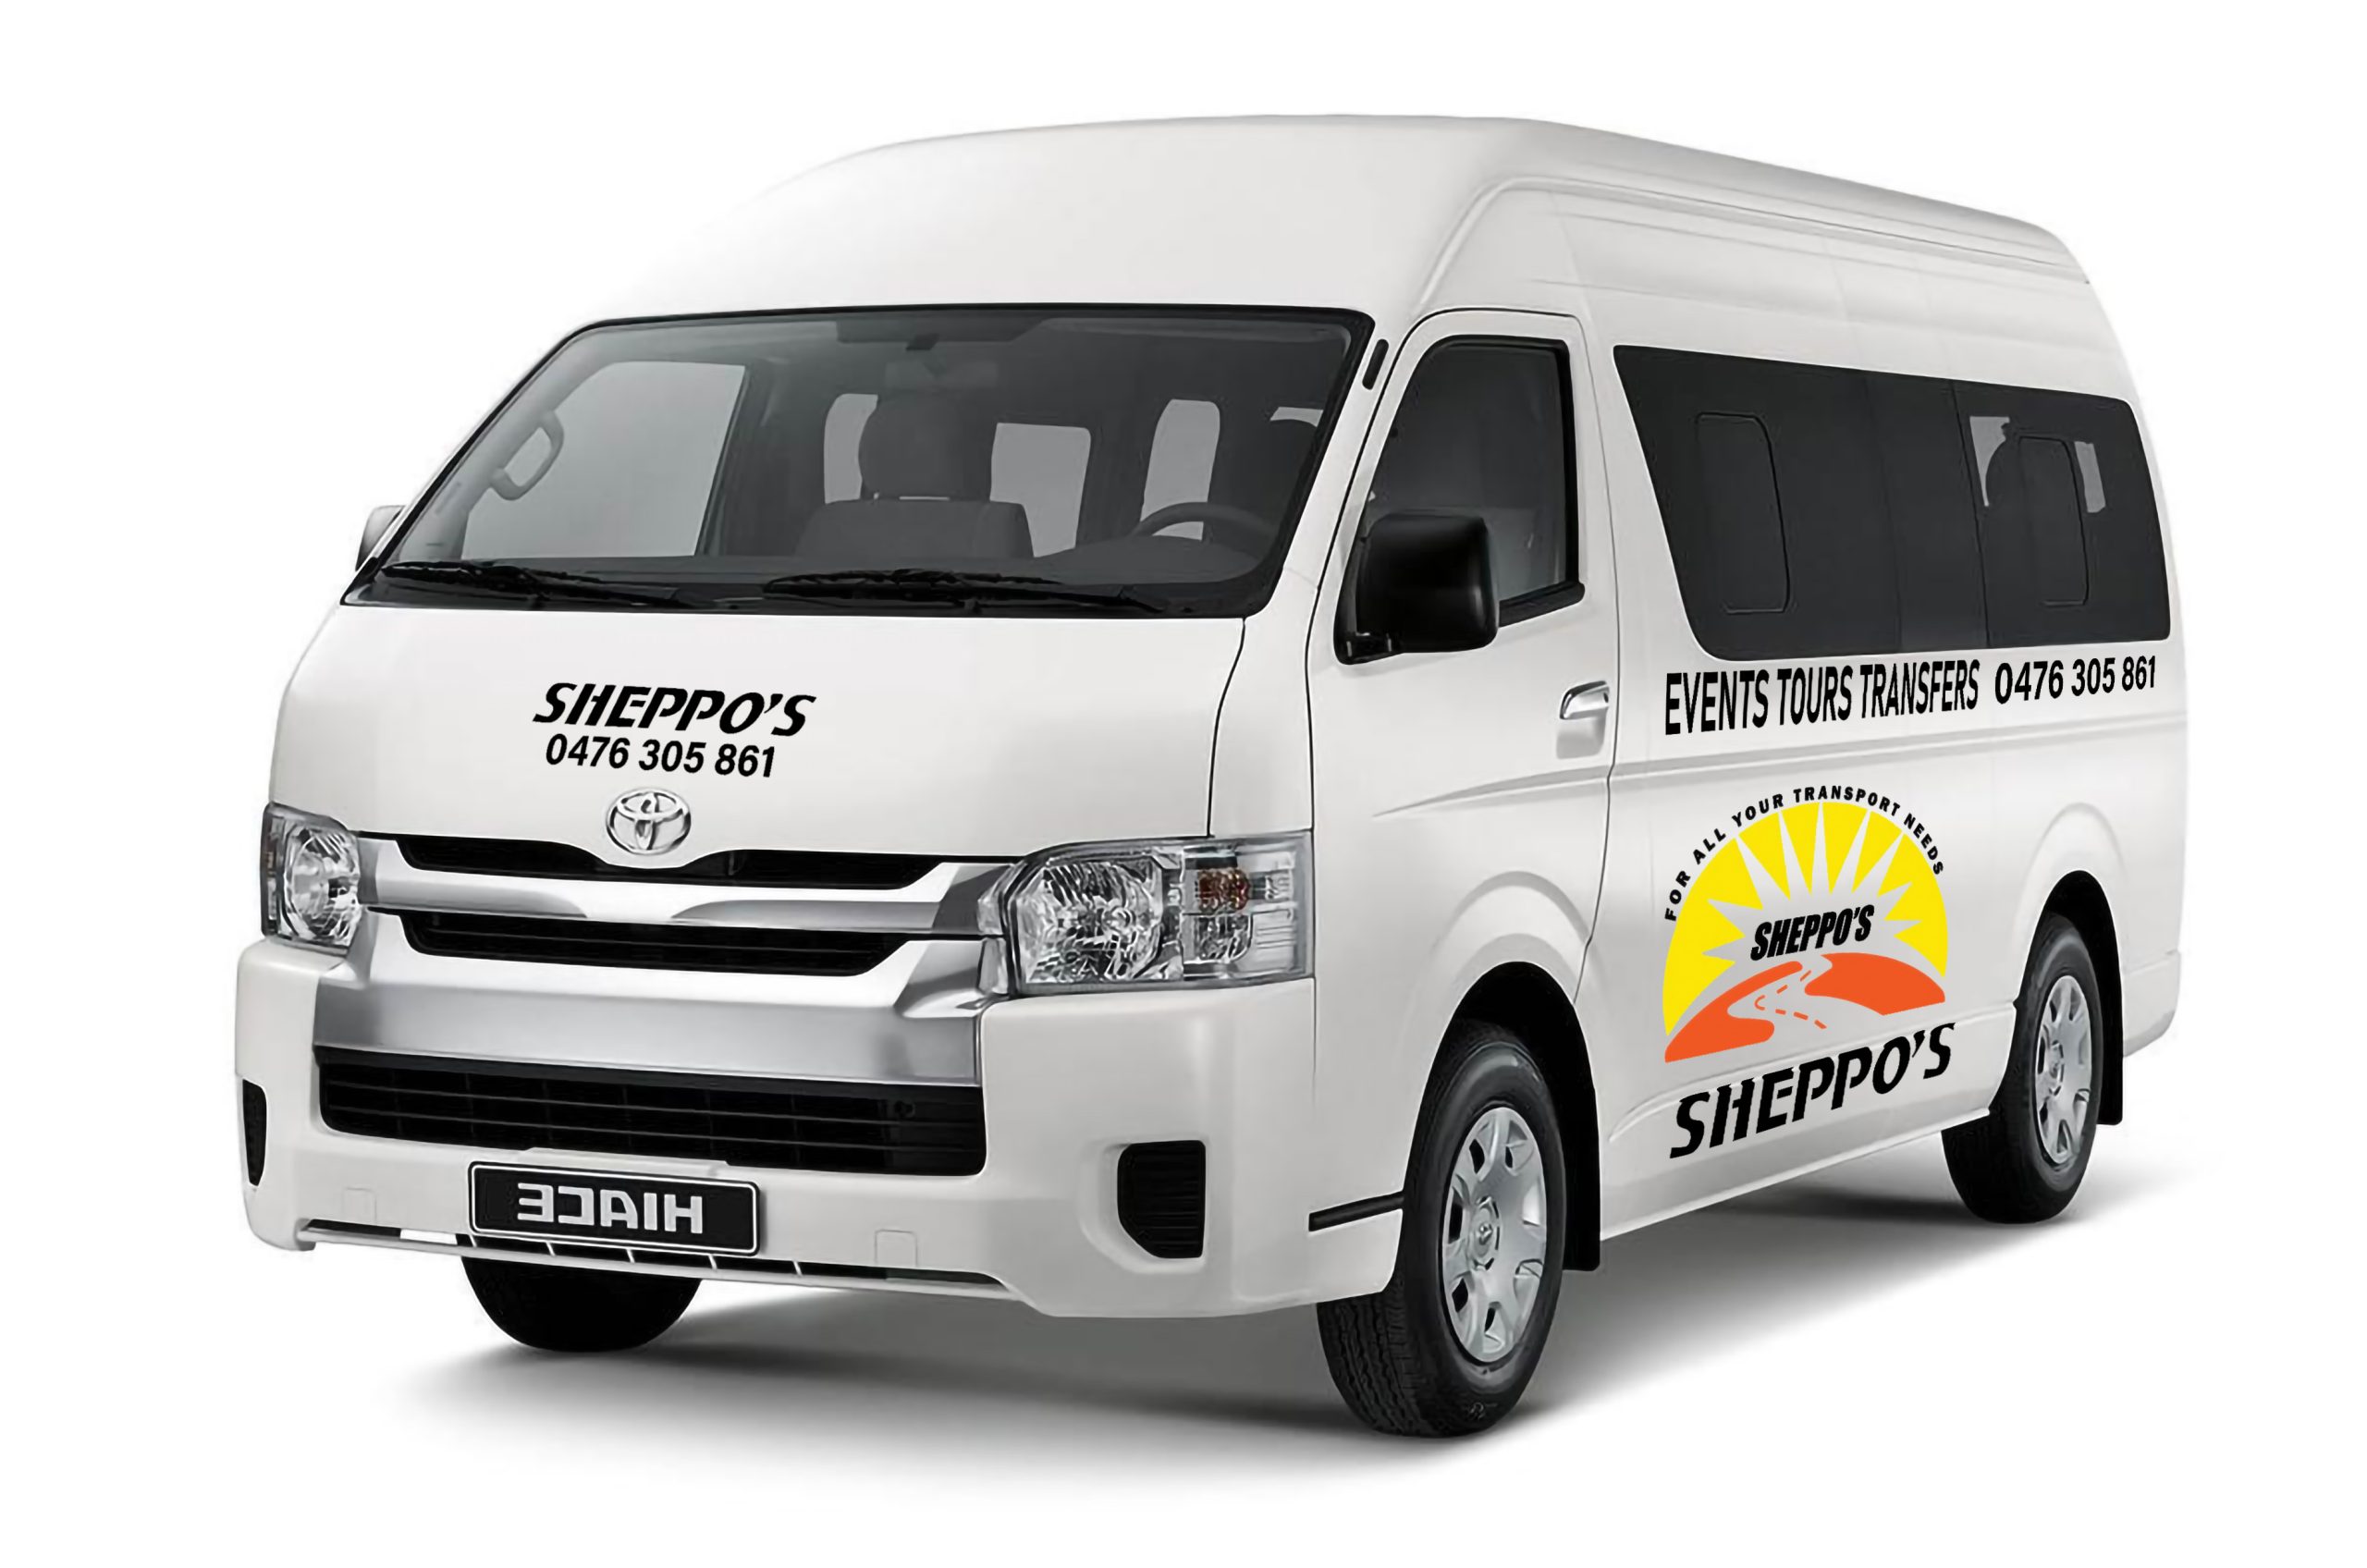 Van for hire in Sydney, Illawarra group and family service.